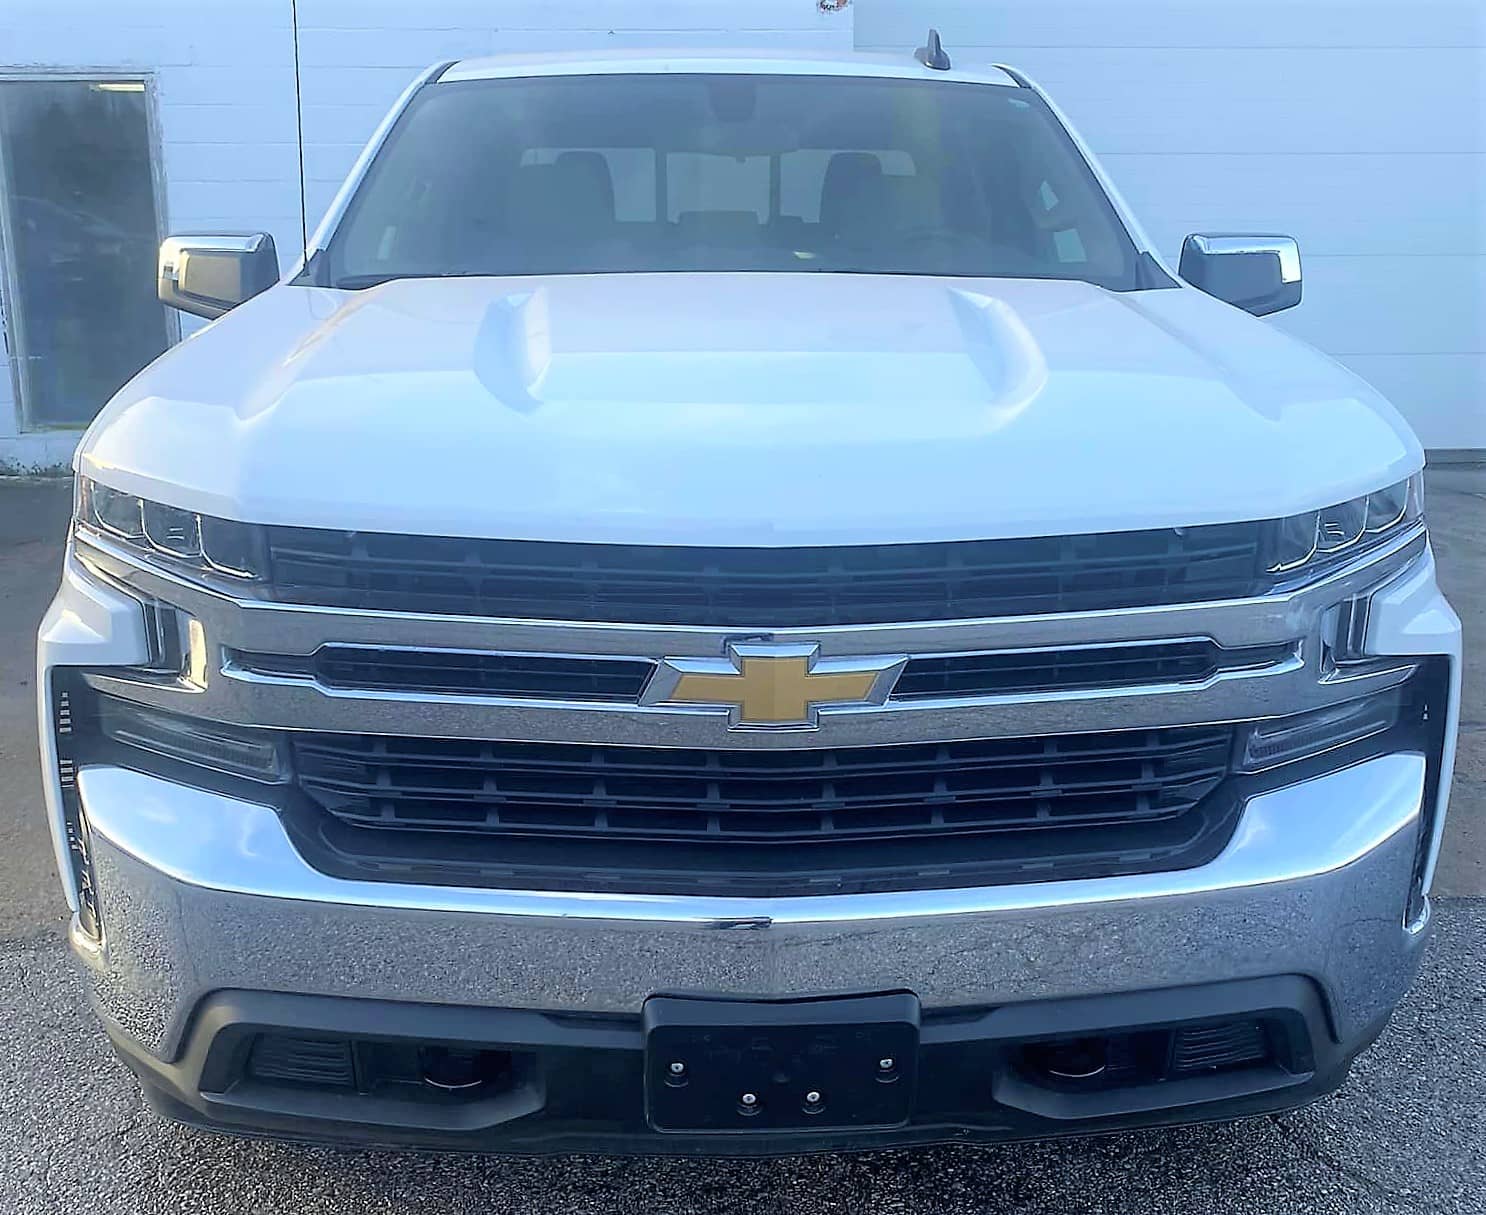 Trigg Fiscal Court Puts 2021 Silverado Up For Bids WHVO